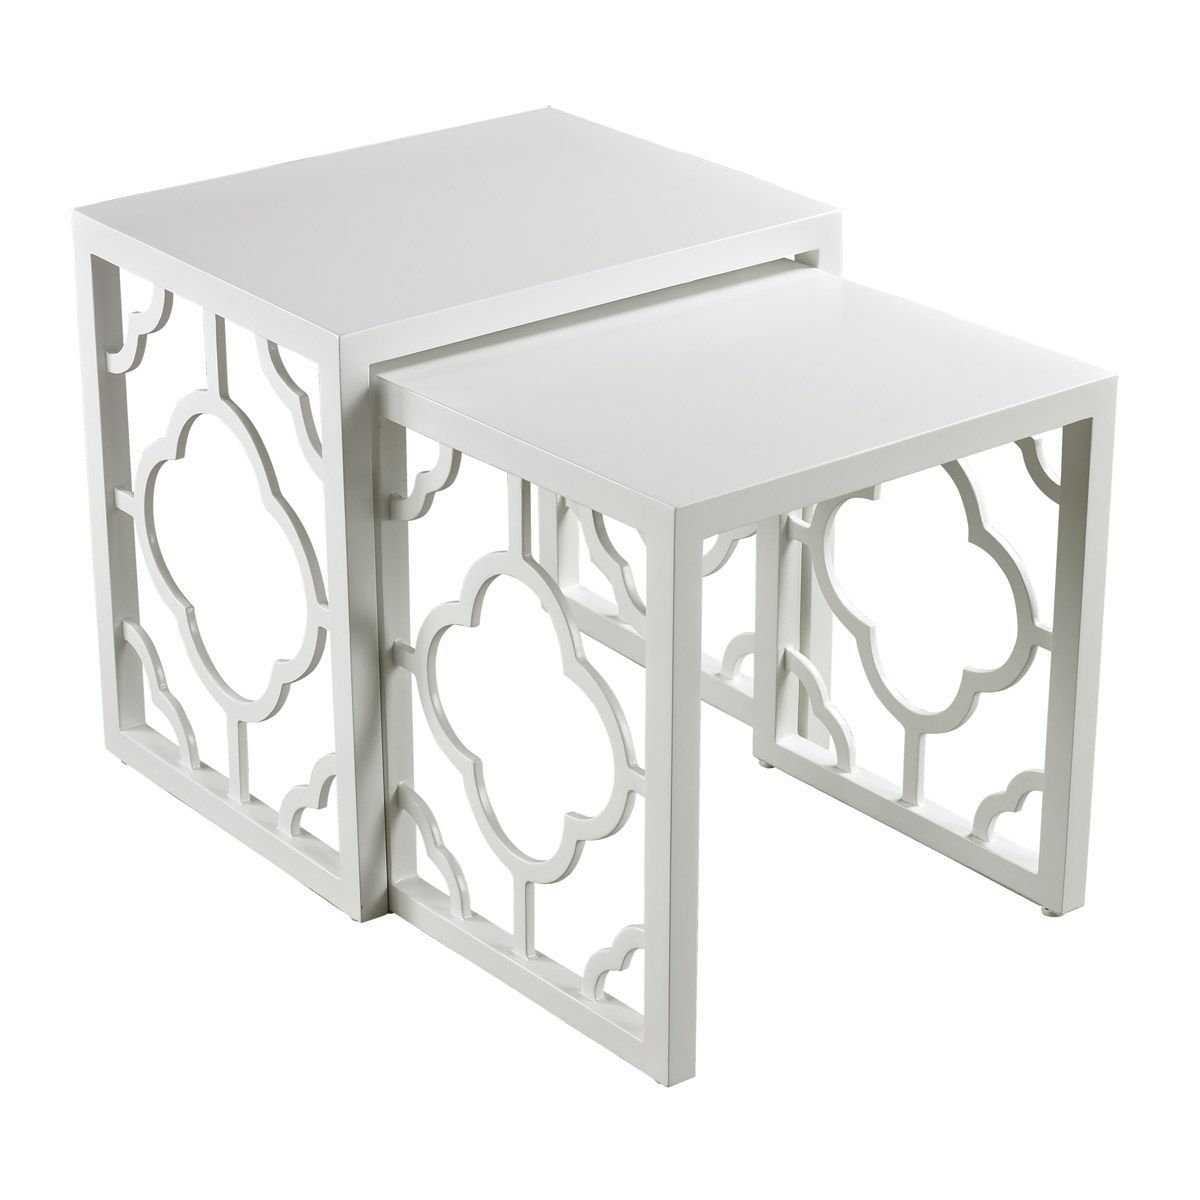 Gloss White Nesting Table | Sterling | Pinterest Inside Stack Hi Gloss Wood Coffee Tables (View 24 of 30)